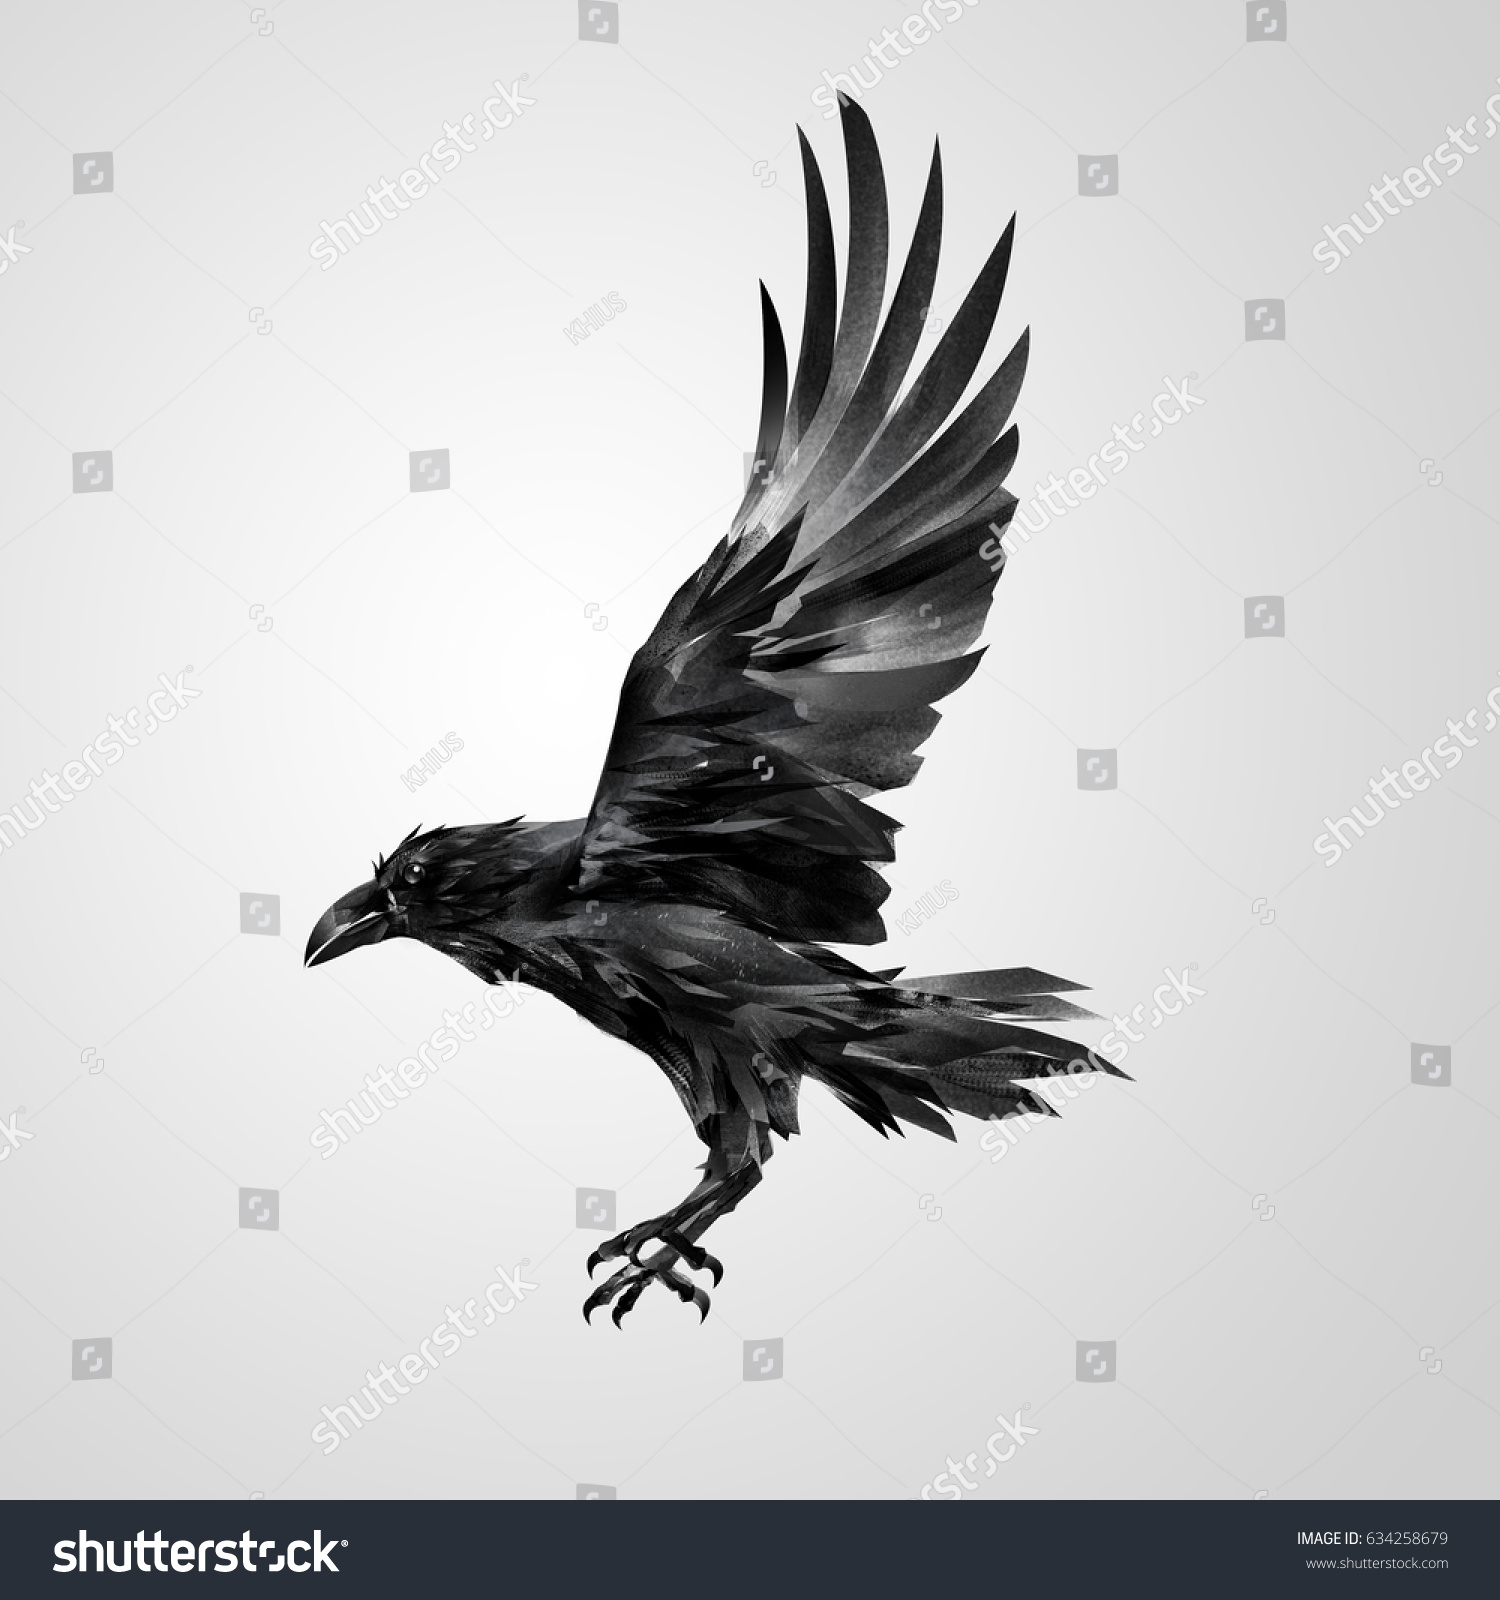 Drawn Realistic Flying Isolated Crow Stock Illustration 634258679